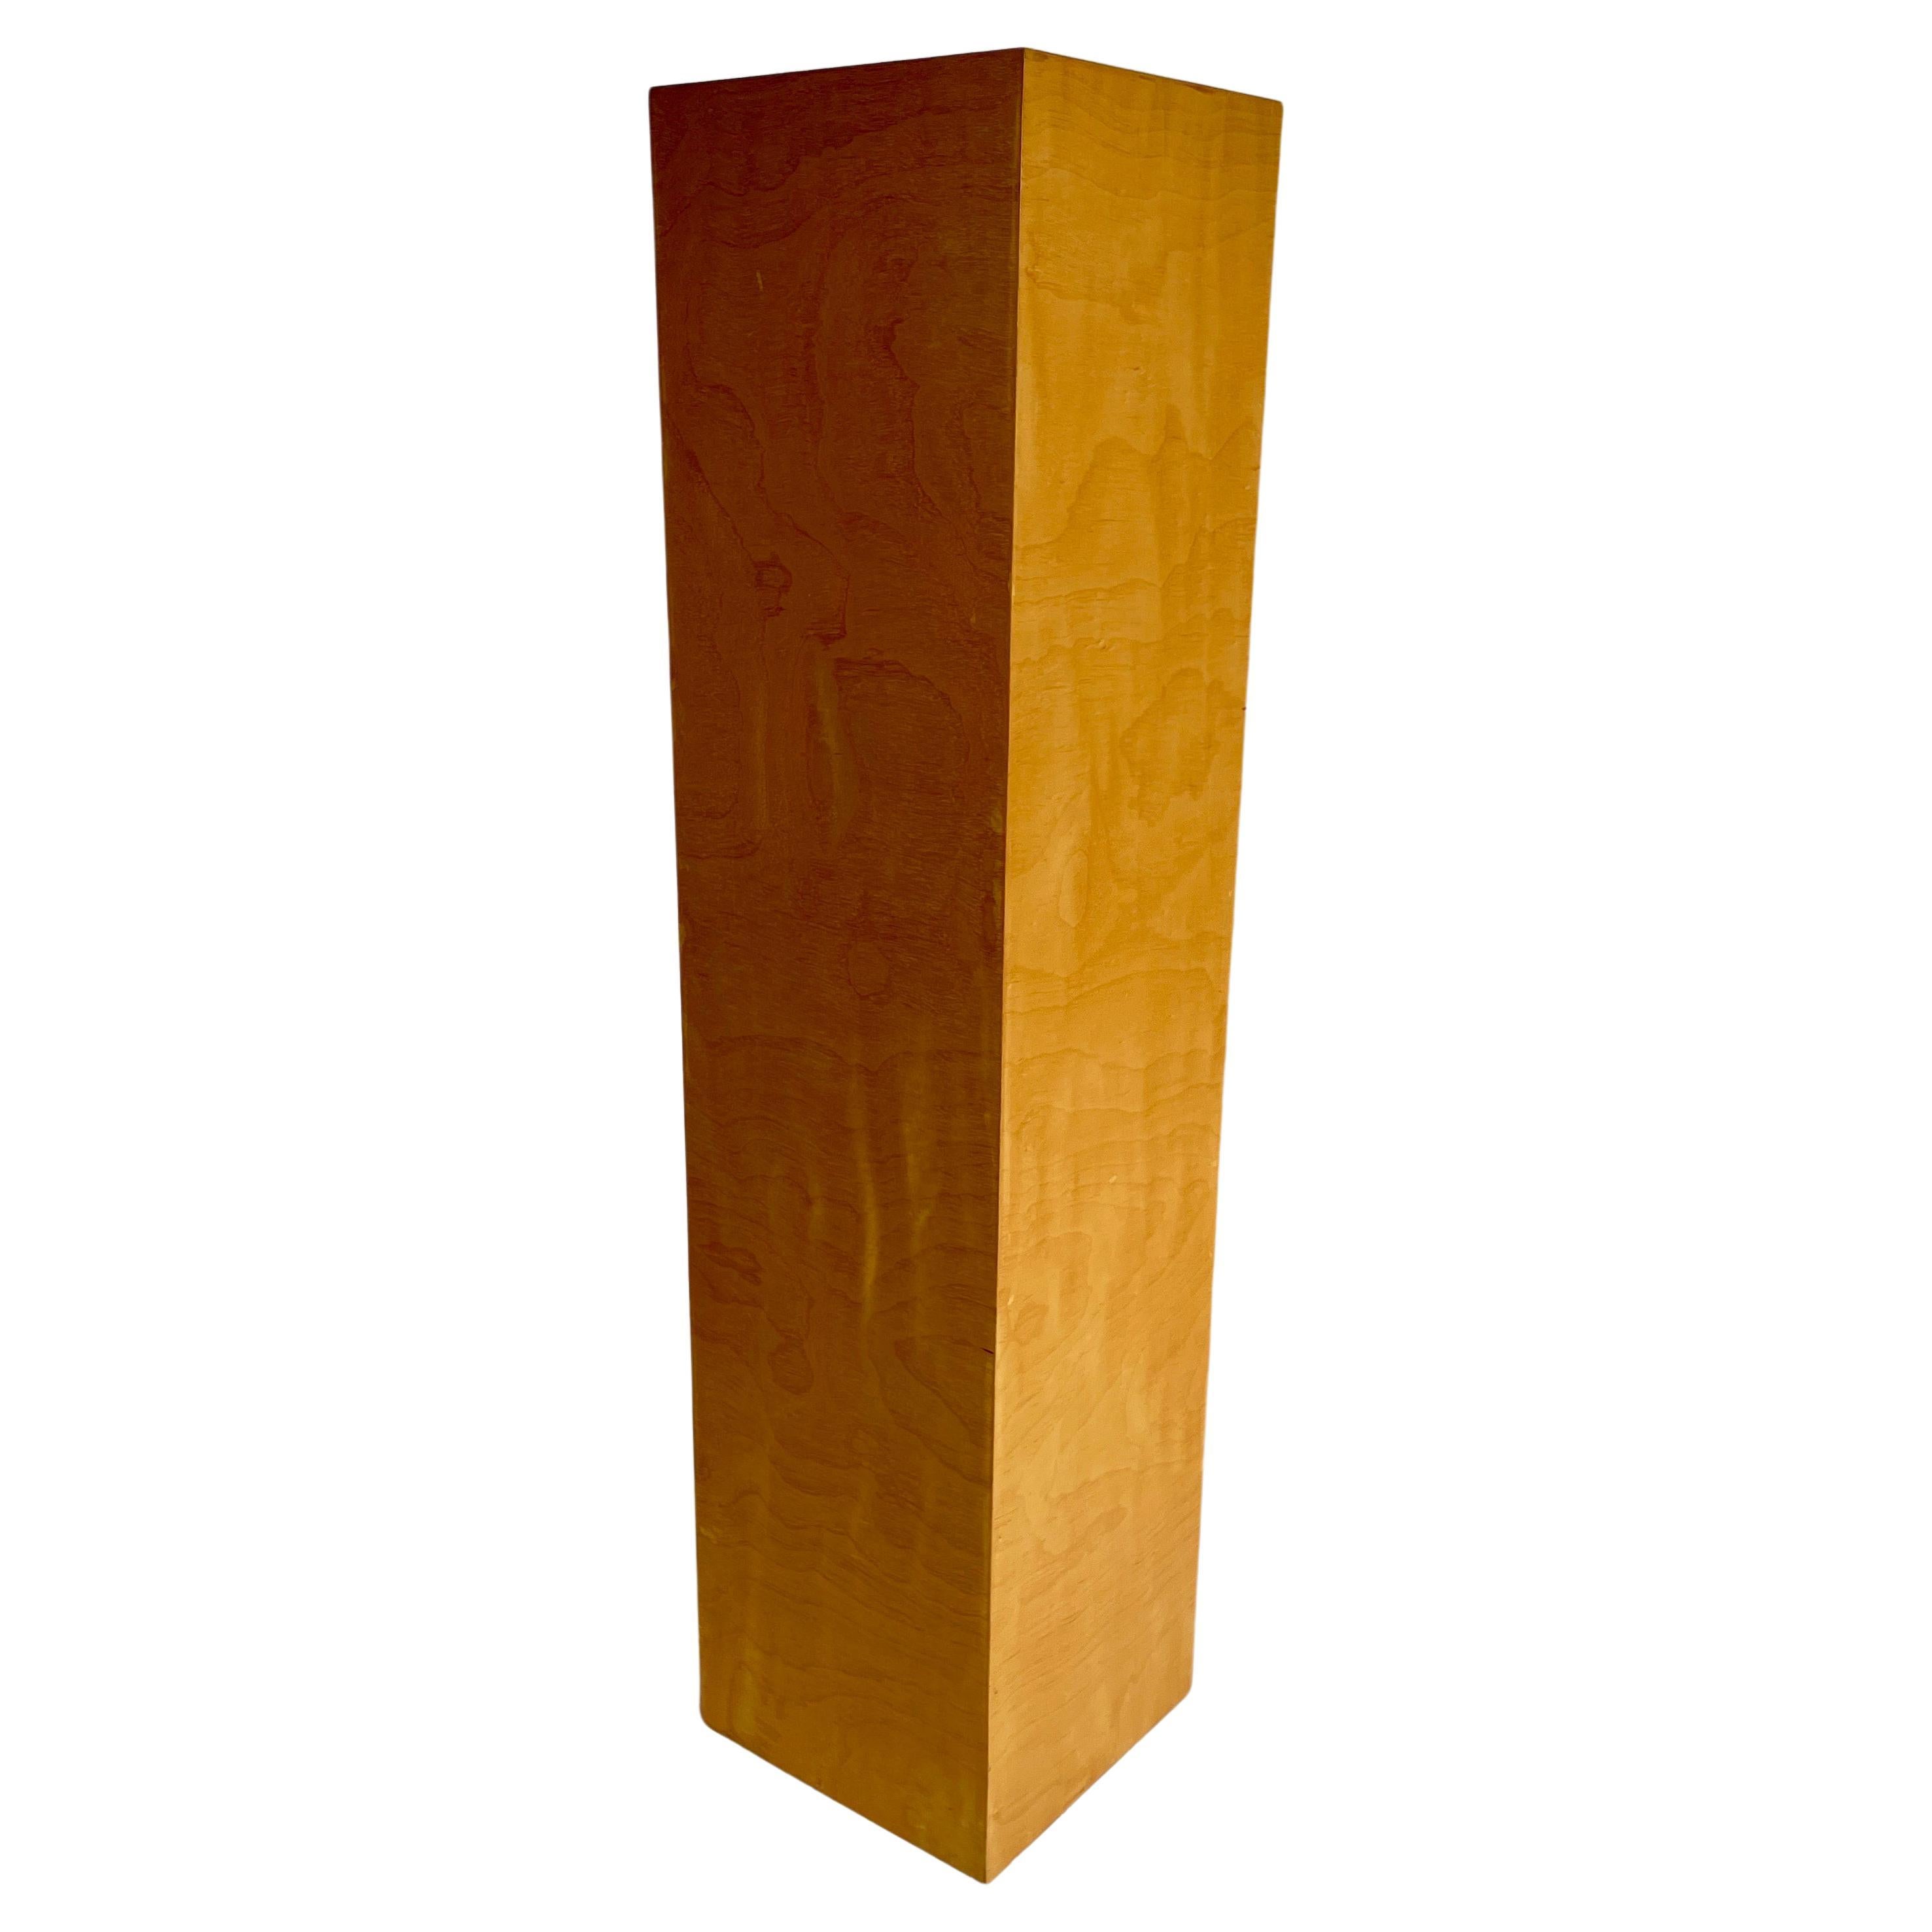 Late 20th Century Light Colored Veneer Wood Pedestal For Sale 2